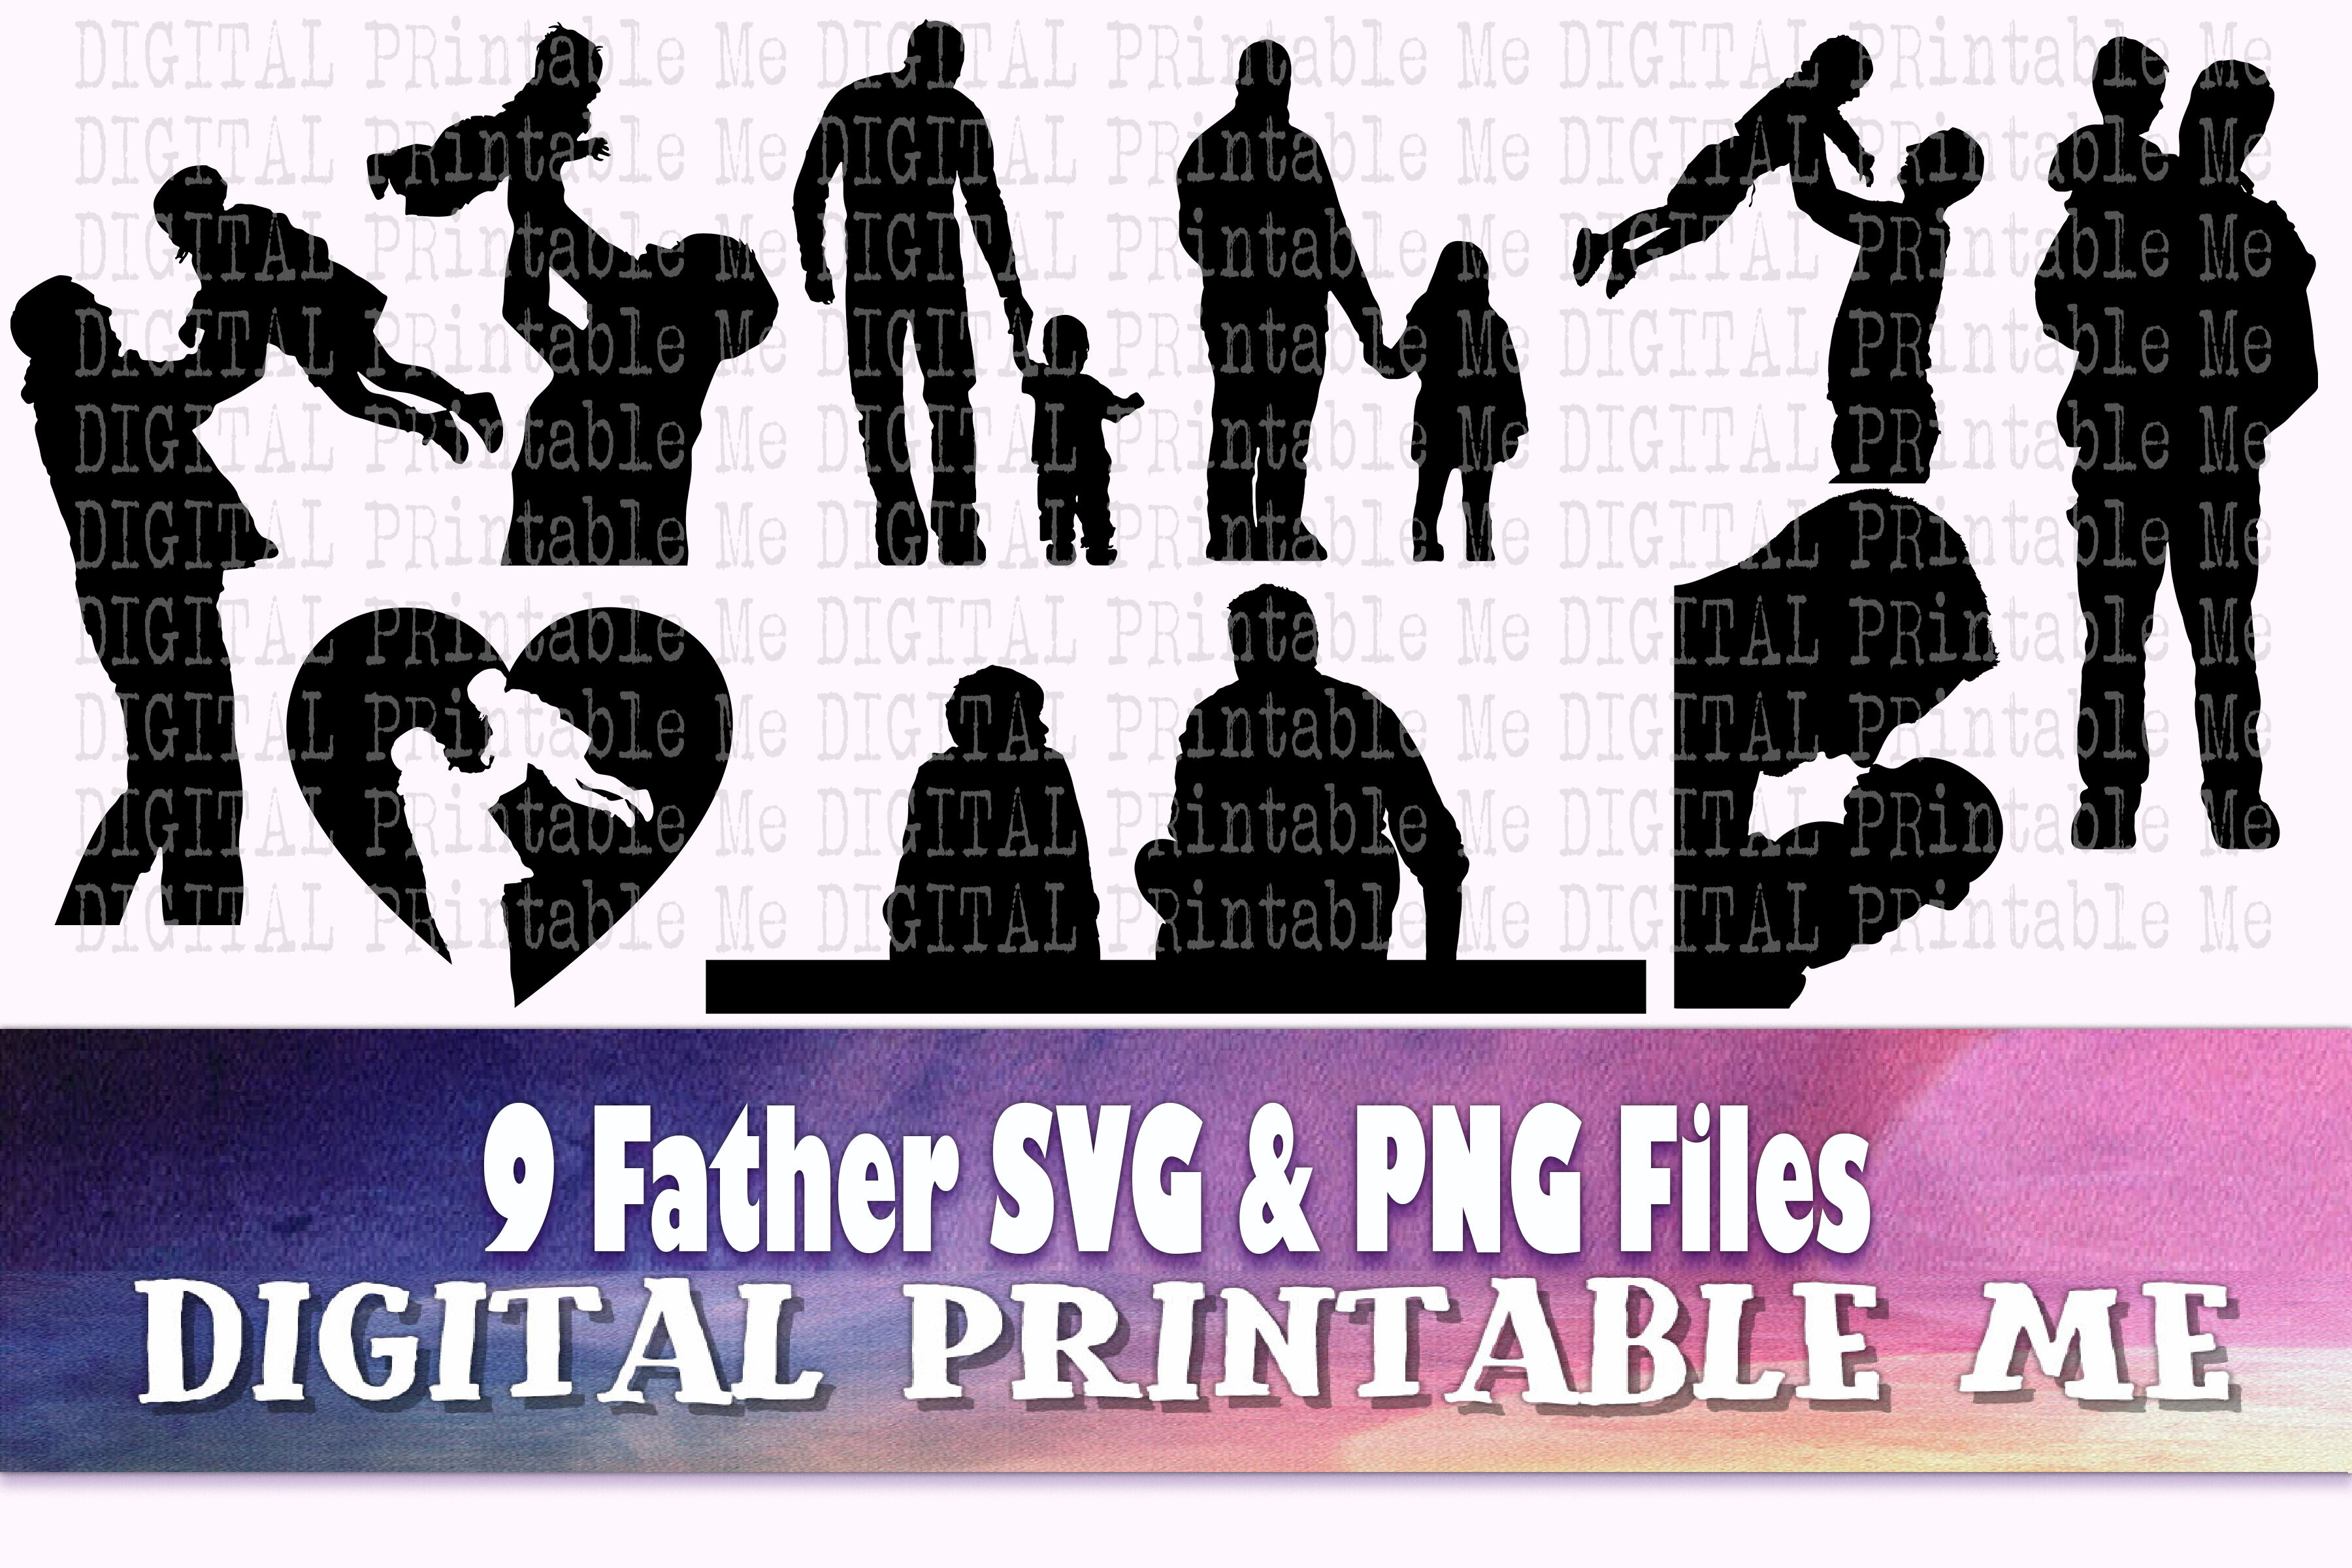 father and daughter silhouette clip art